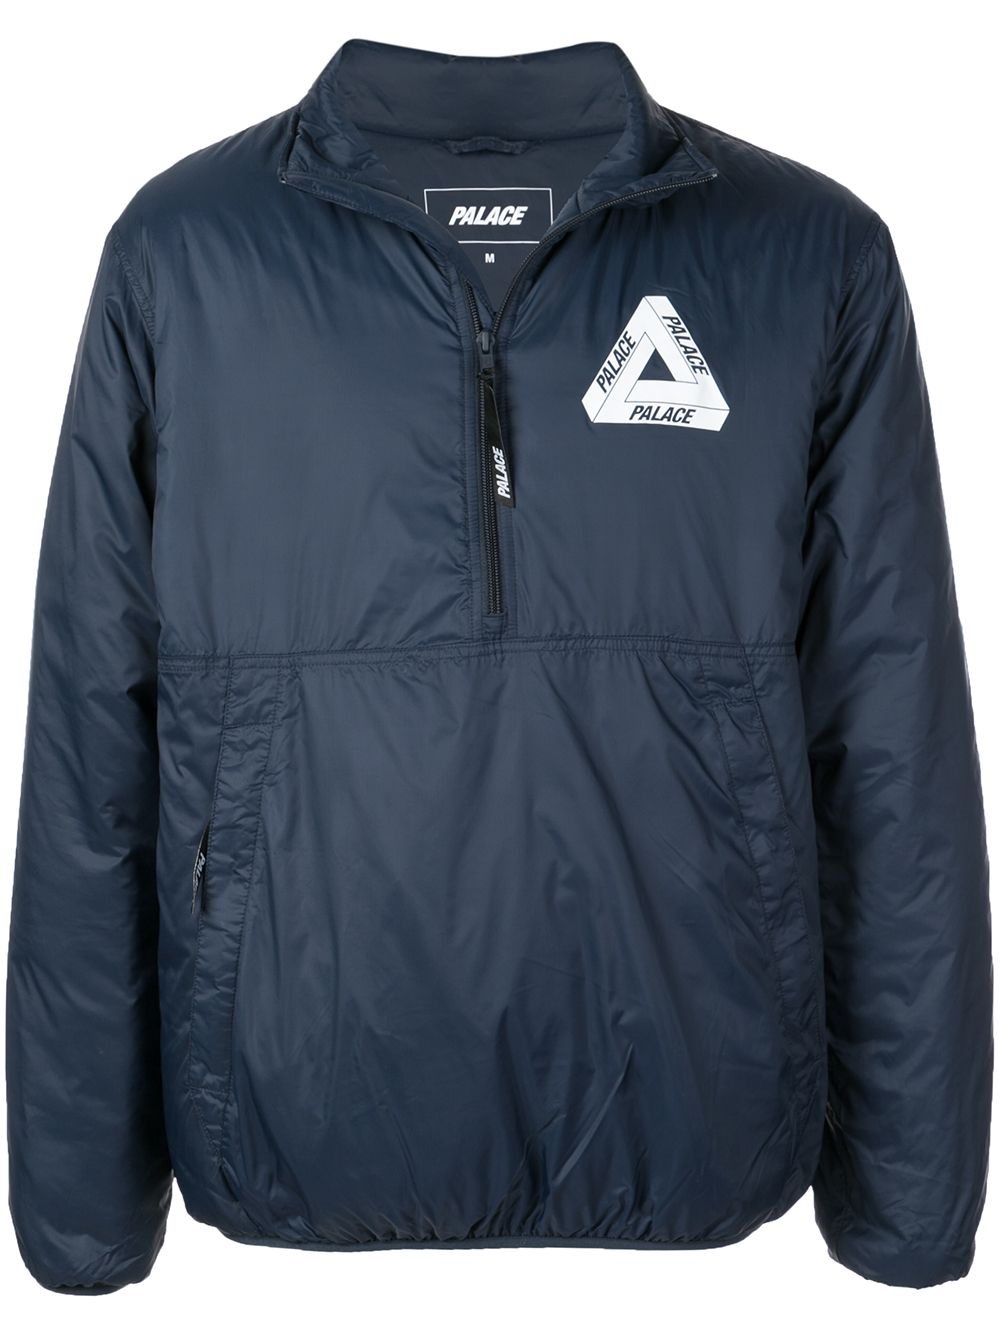 Palace Packable Thinsulate half-zip jacket - Blue von Palace